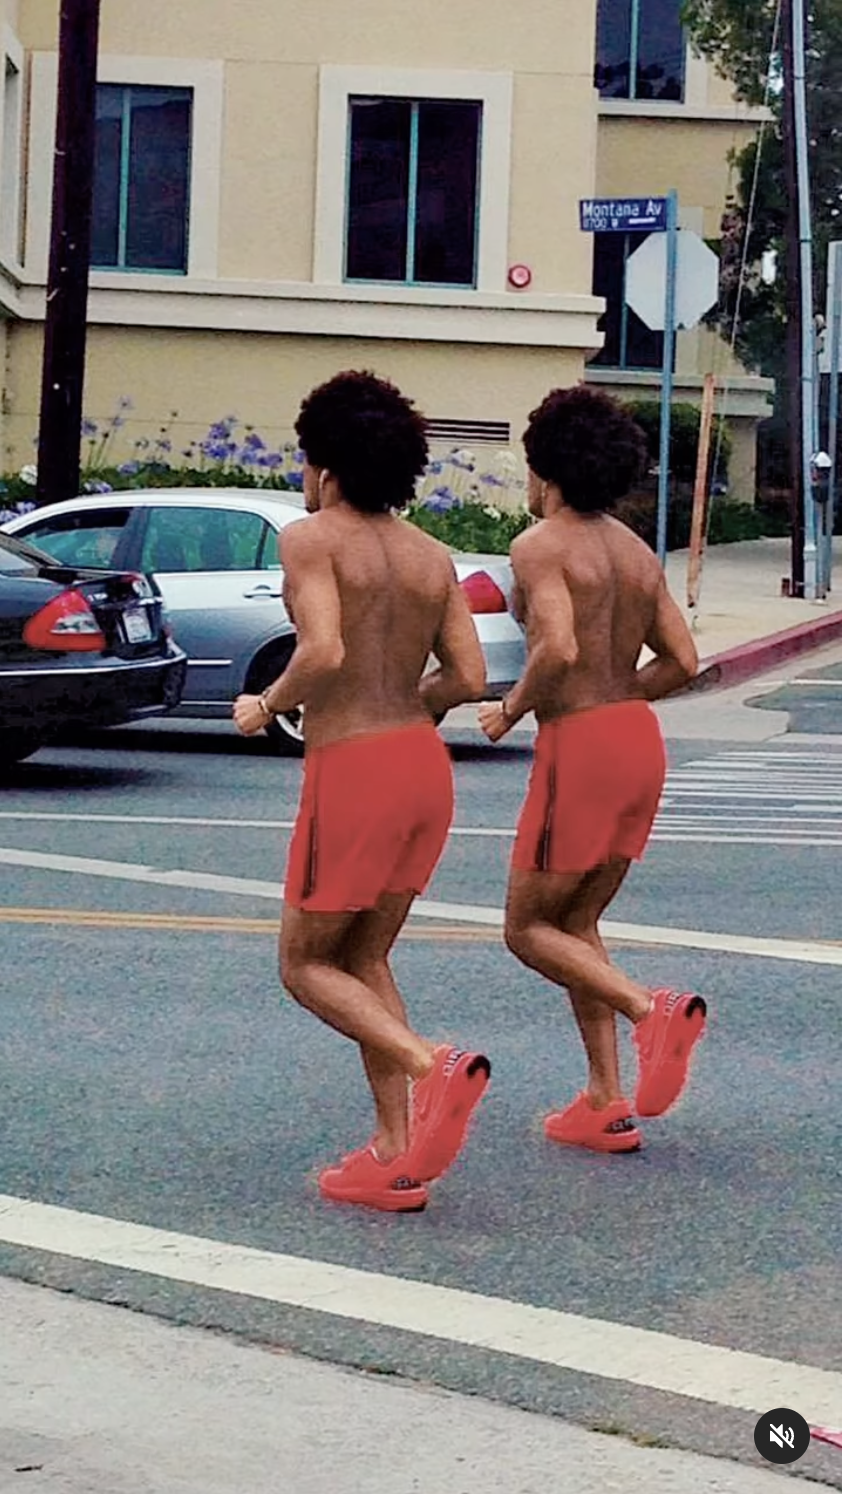 Image of two identically-looking men running on a street in red pants and red shoes.